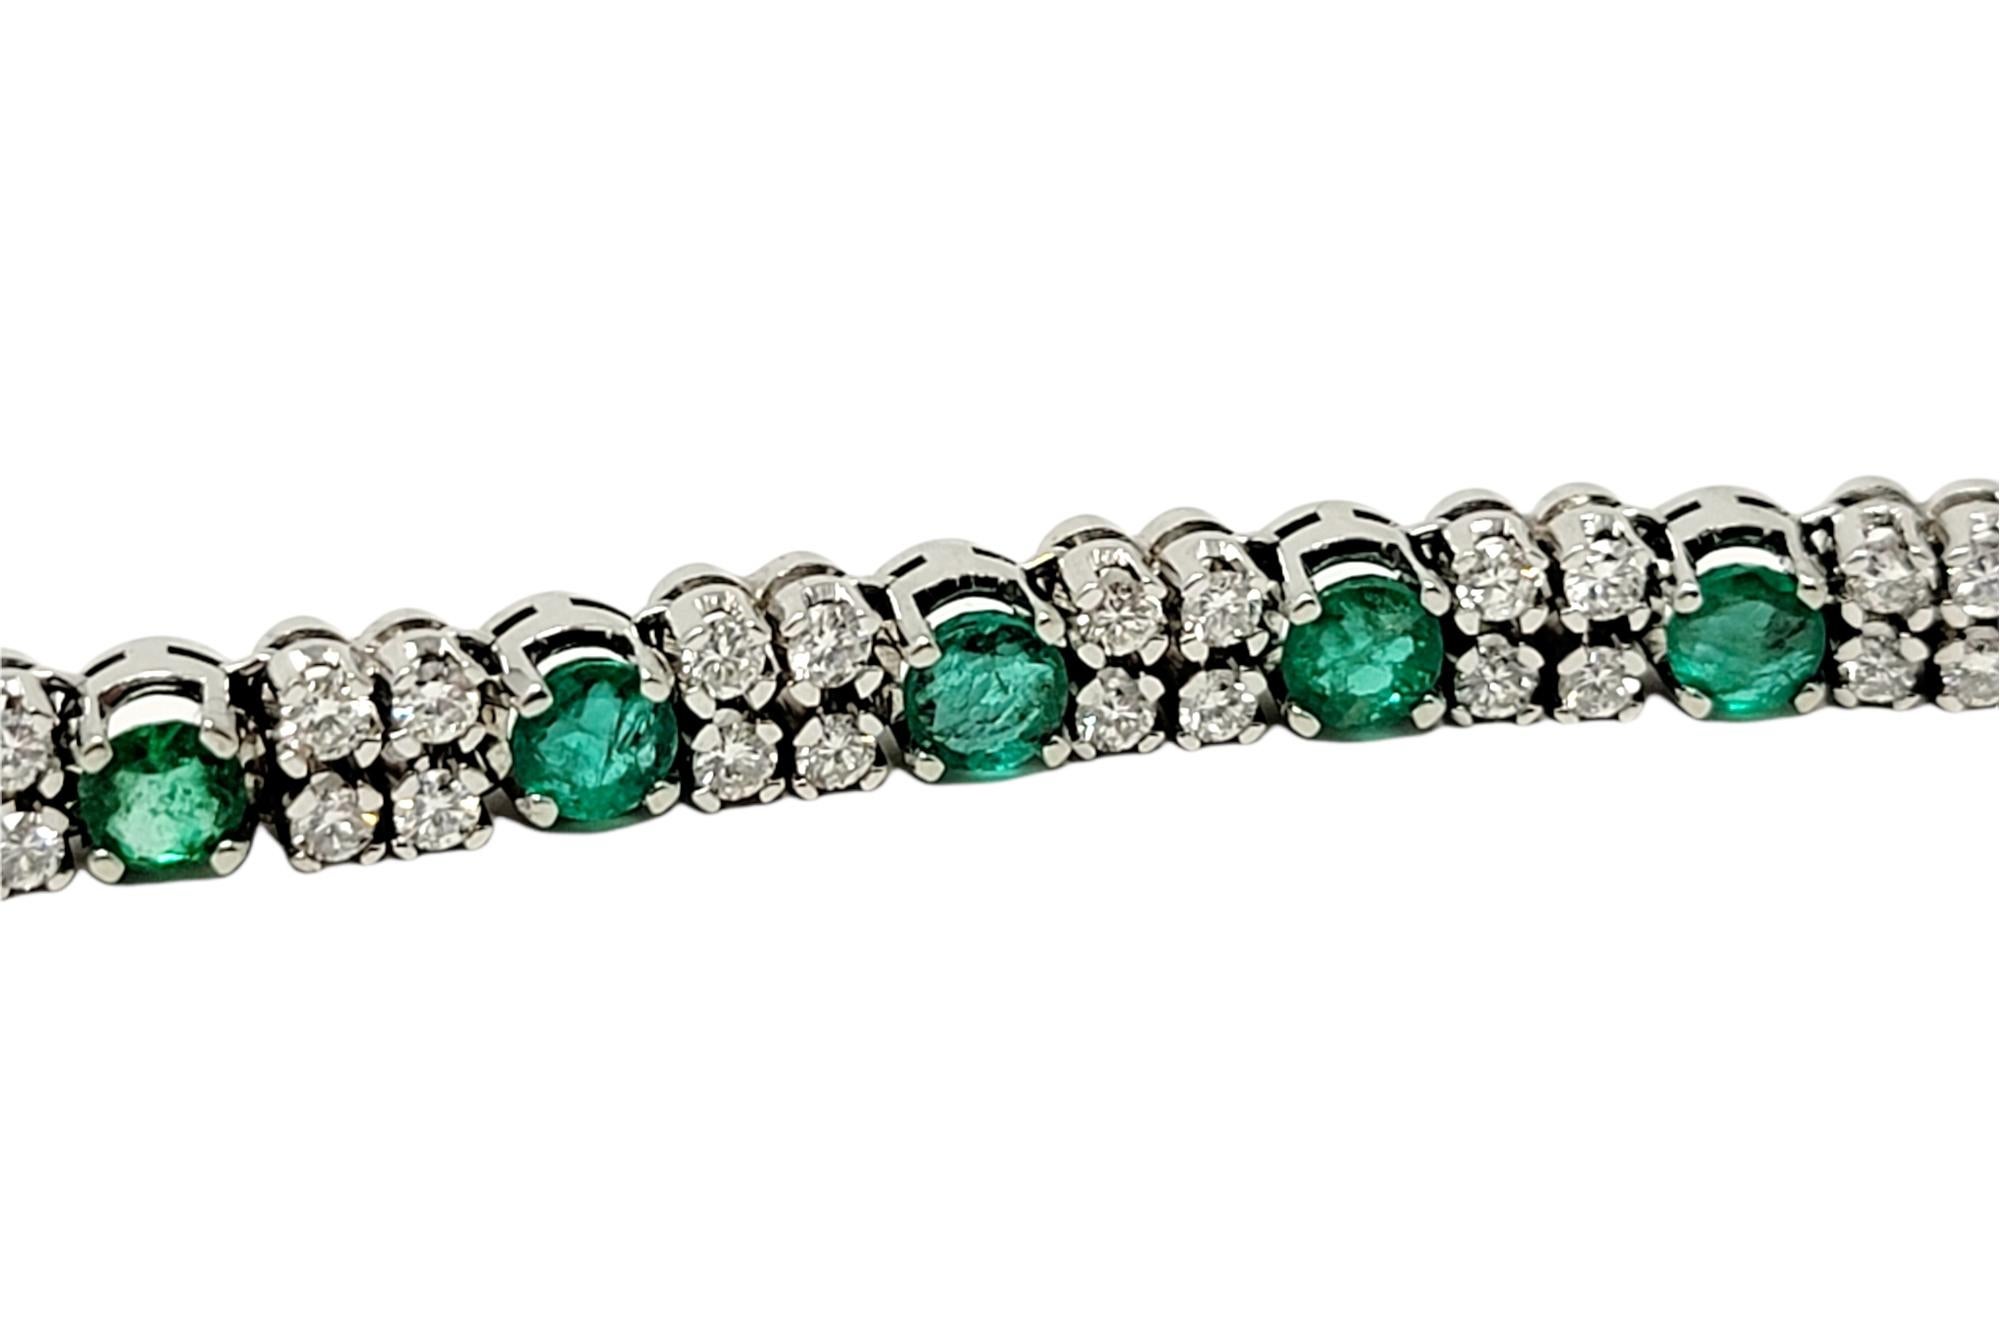 Contemporary 1.82 Carats Round Diamond and Emerald Link Bracelet in 18 Karat White Gold For Sale